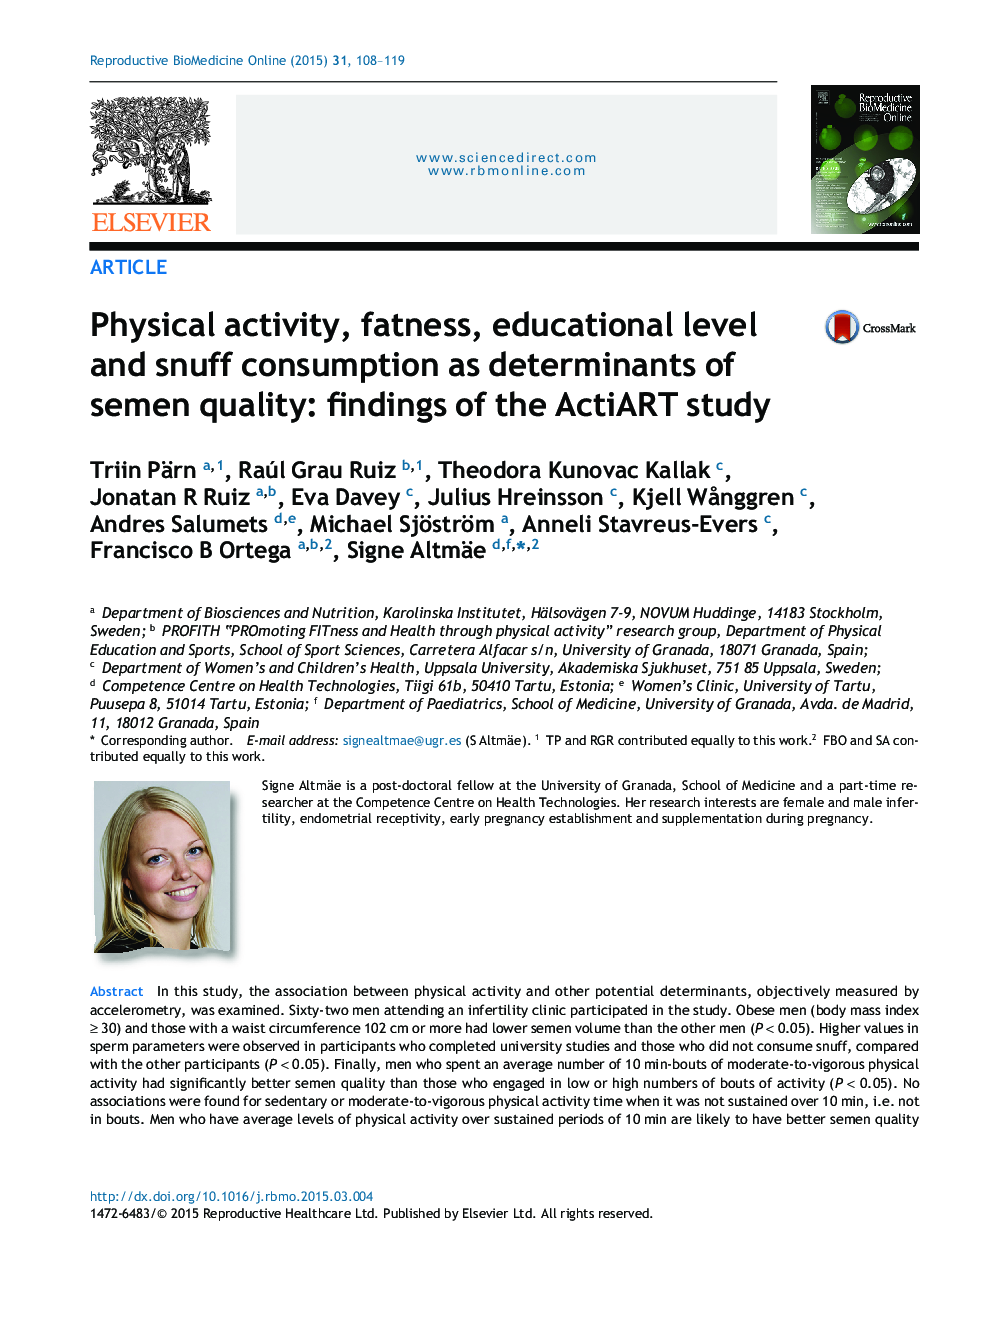 Physical activity, fatness, educational level and snuff consumption as determinants of semen quality: findings of the ActiART study